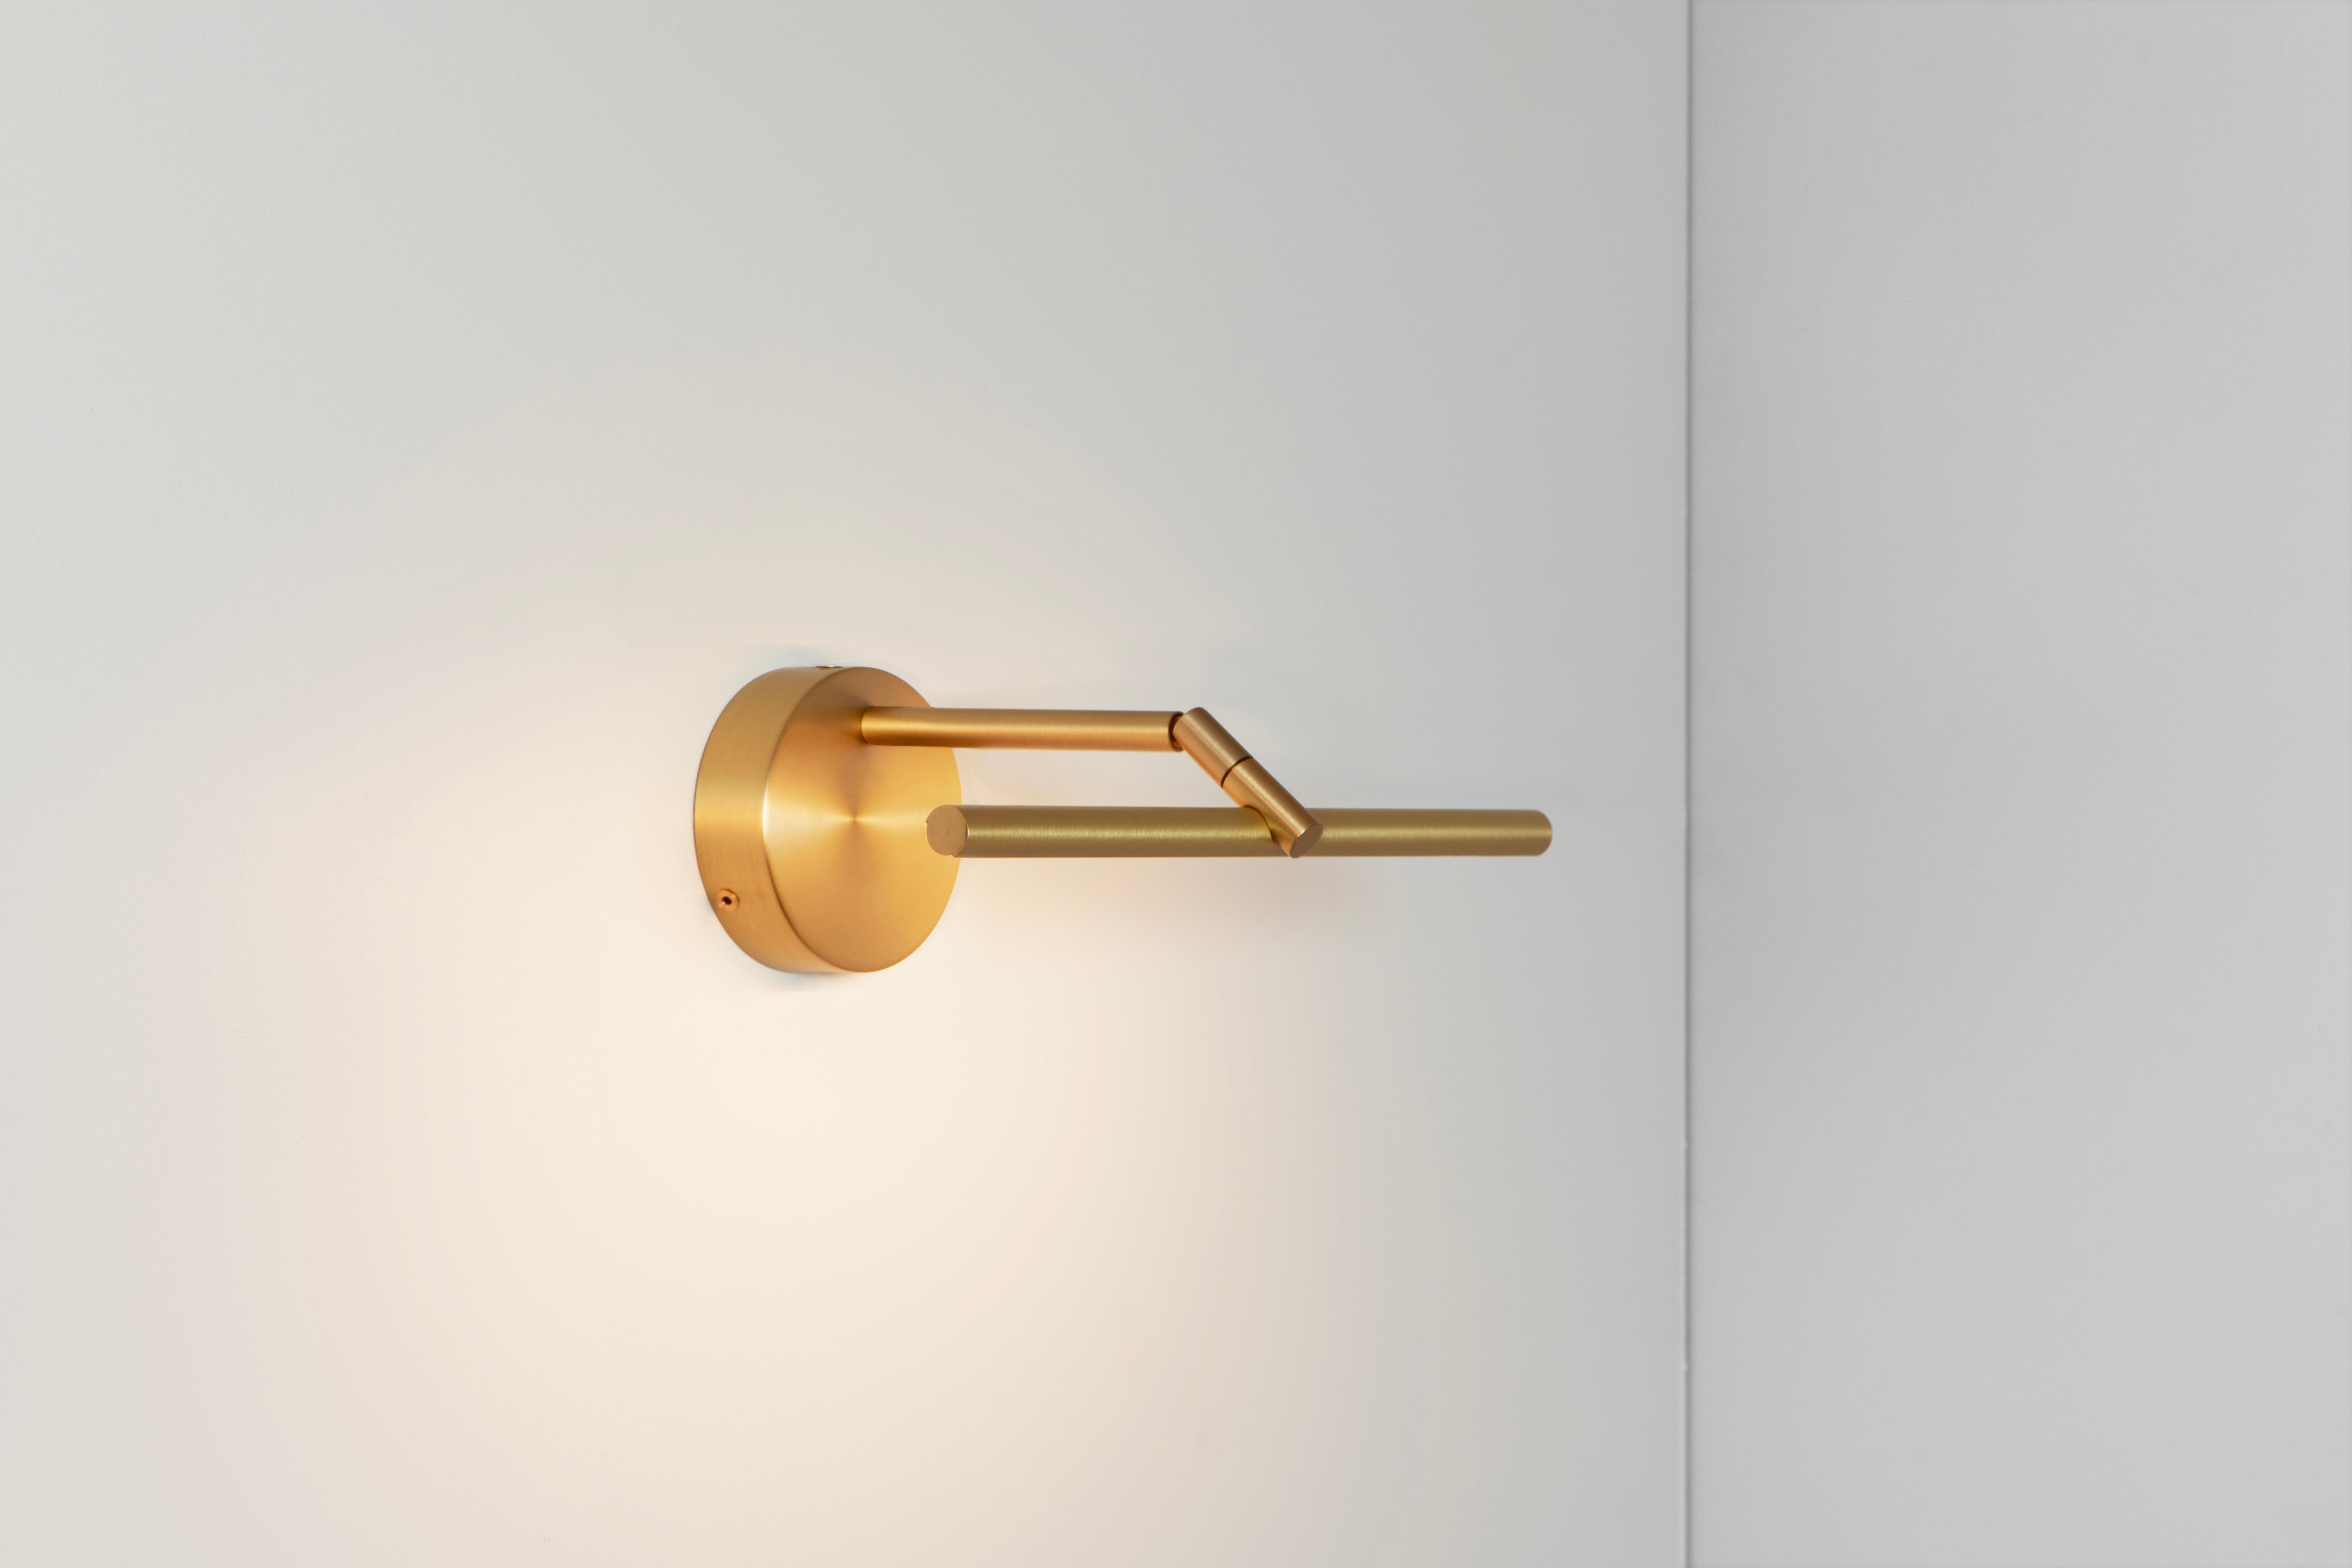 Airy R Wall Light by Emilie Cathelineau
Dimensions: D 19.4 x W 41.4 X H 9 cm
Materials: Solid brass.


Discover luminous elegance redefined with the Airy picture wall light from CVL Luminaires, a creation signed by the talented designer Emilie